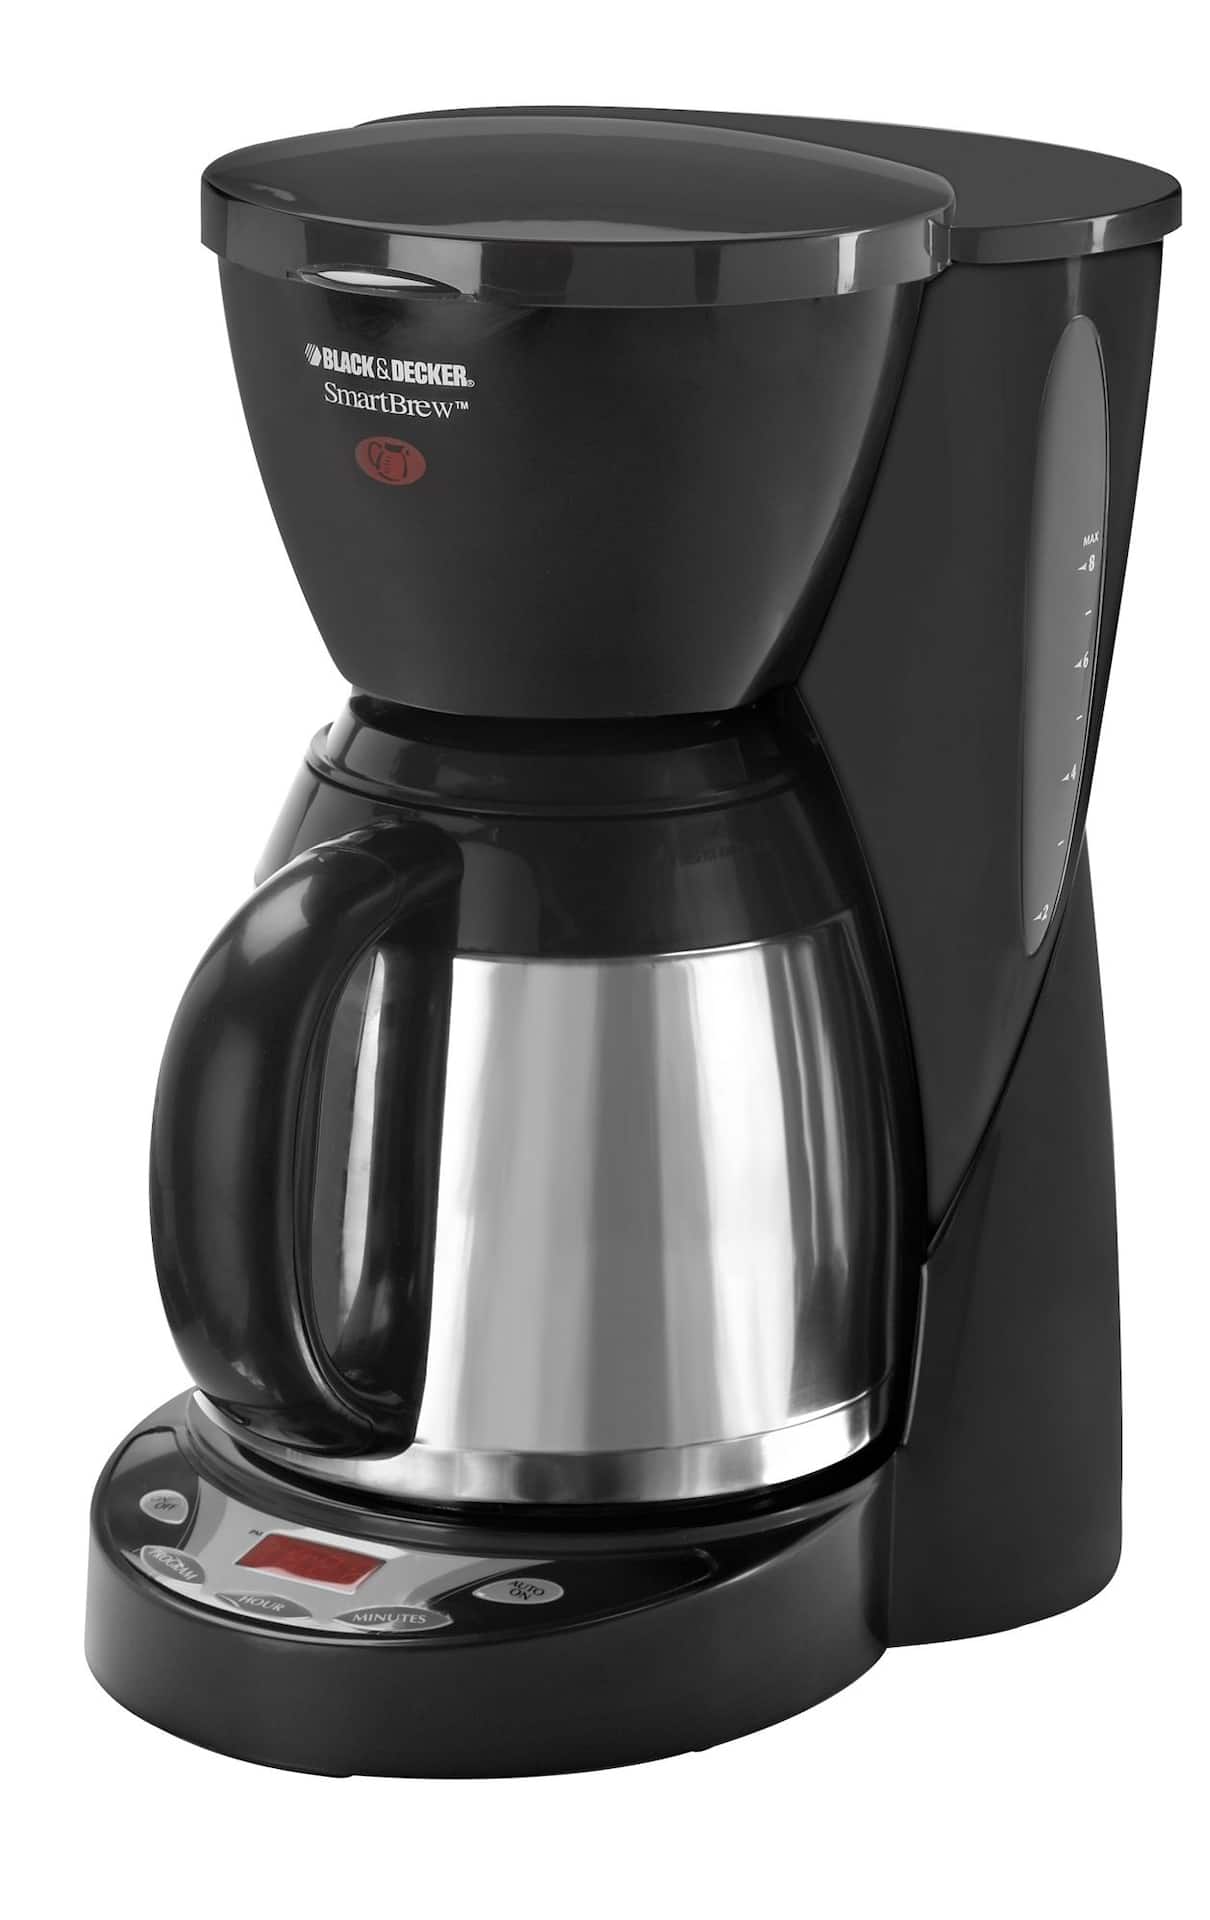 https://media-www.canadiantire.ca/product/living/kitchen/kitchen-appliances/0430420/b-d-8-cup-thermal-coffee-maker-7fd2c044-a3d4-40d9-bbdd-213ad3cf7290-jpgrendition.jpg